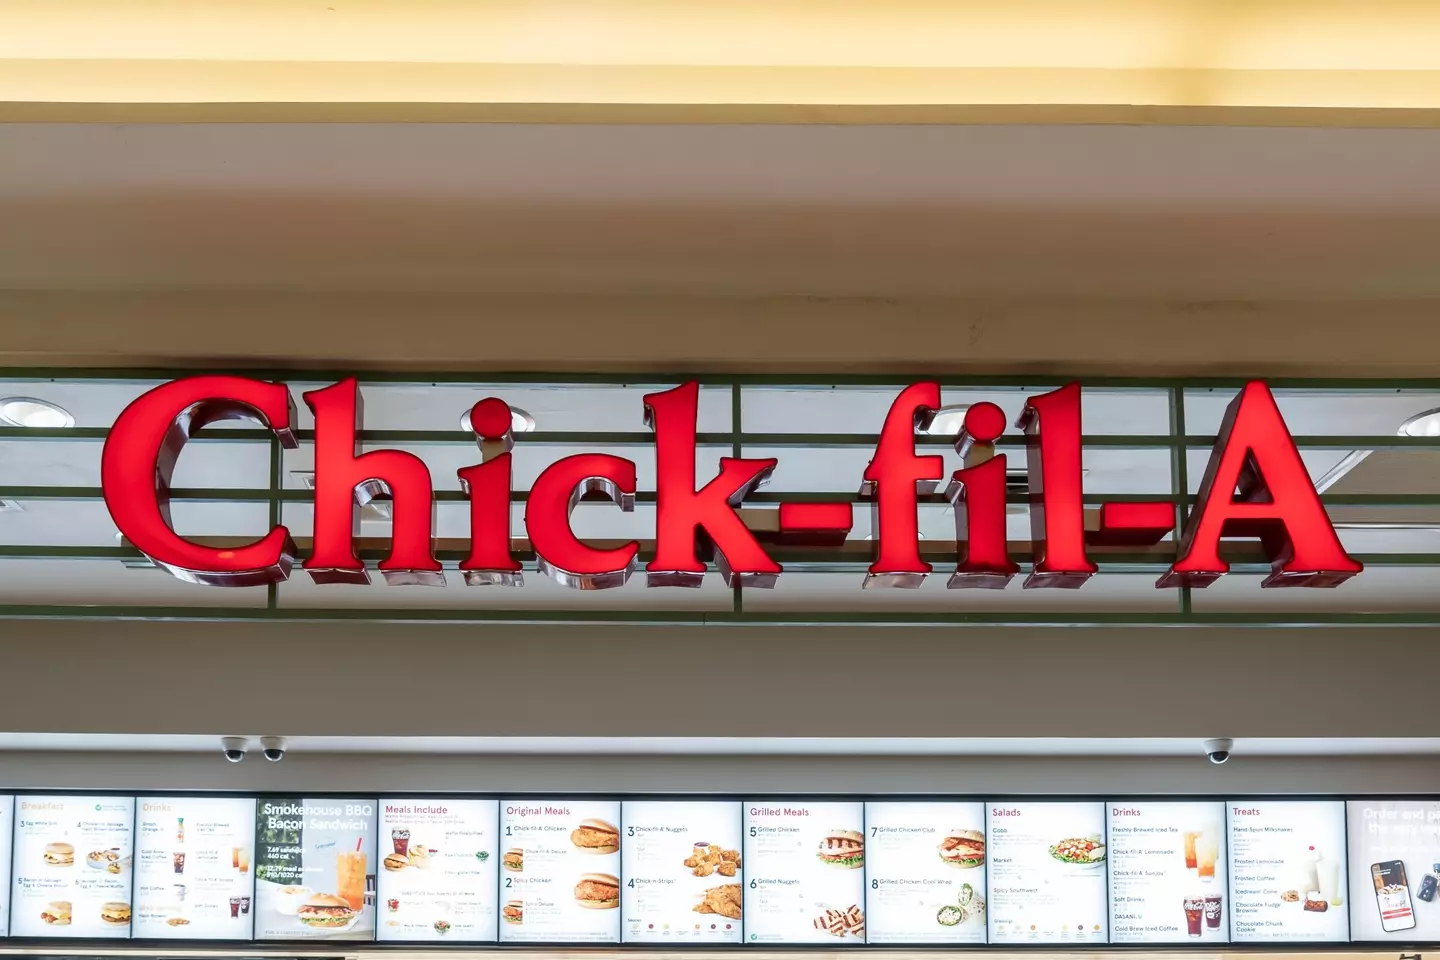 Chick-fil-A has been inundated with applications from people looking for work.